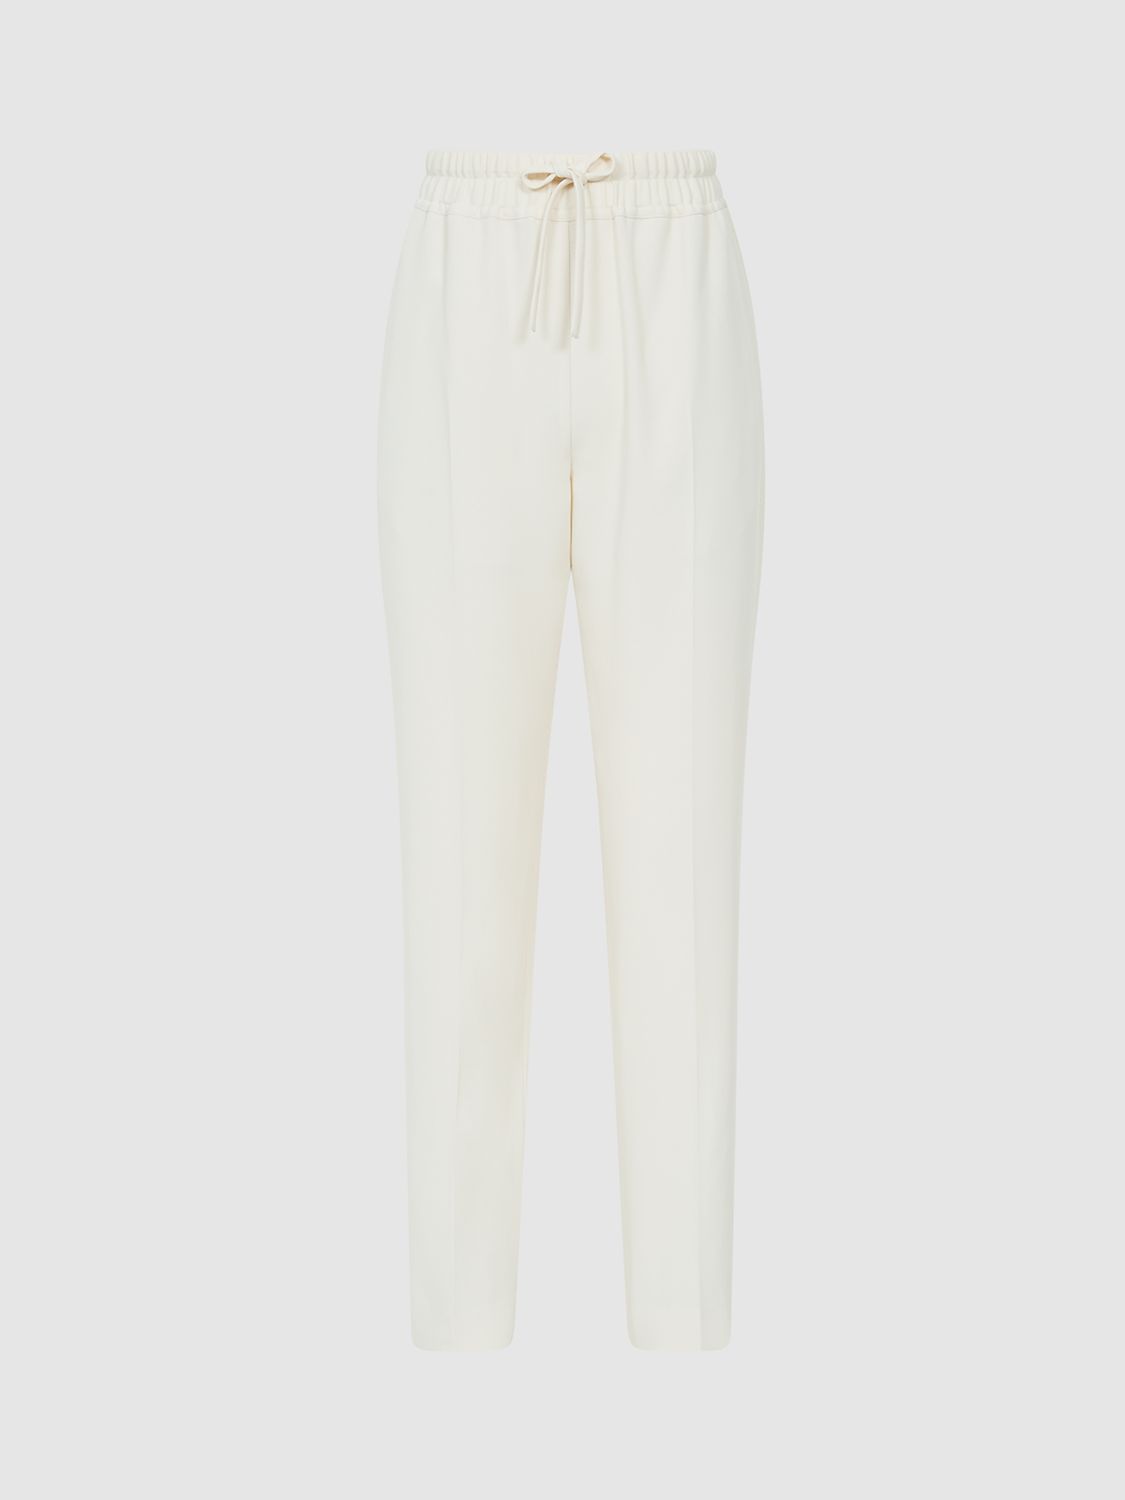 Reiss Petite Hailey Pull On Trousers, Cream at John Lewis & Partners